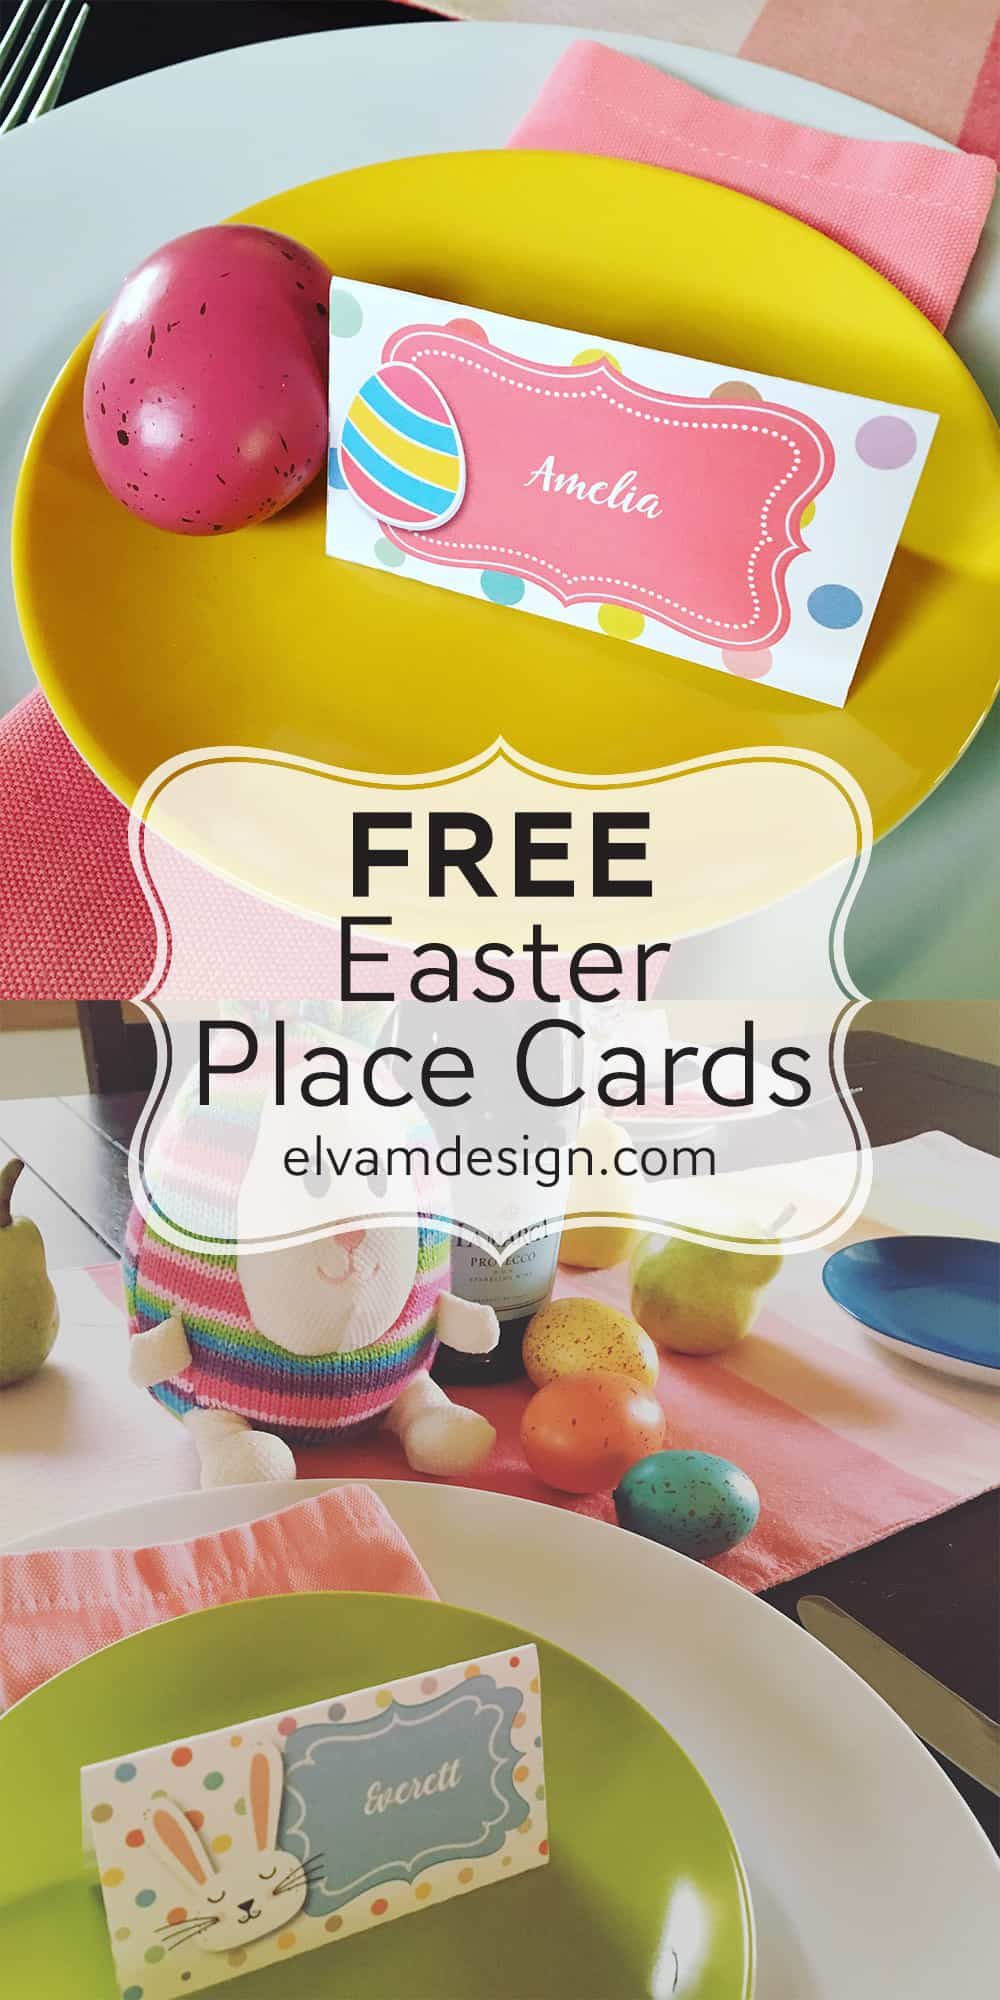 Free Easter Place Card (Or Food Tents) - Elva M Design Studio pertaining to Free Easter Place Cards Printable